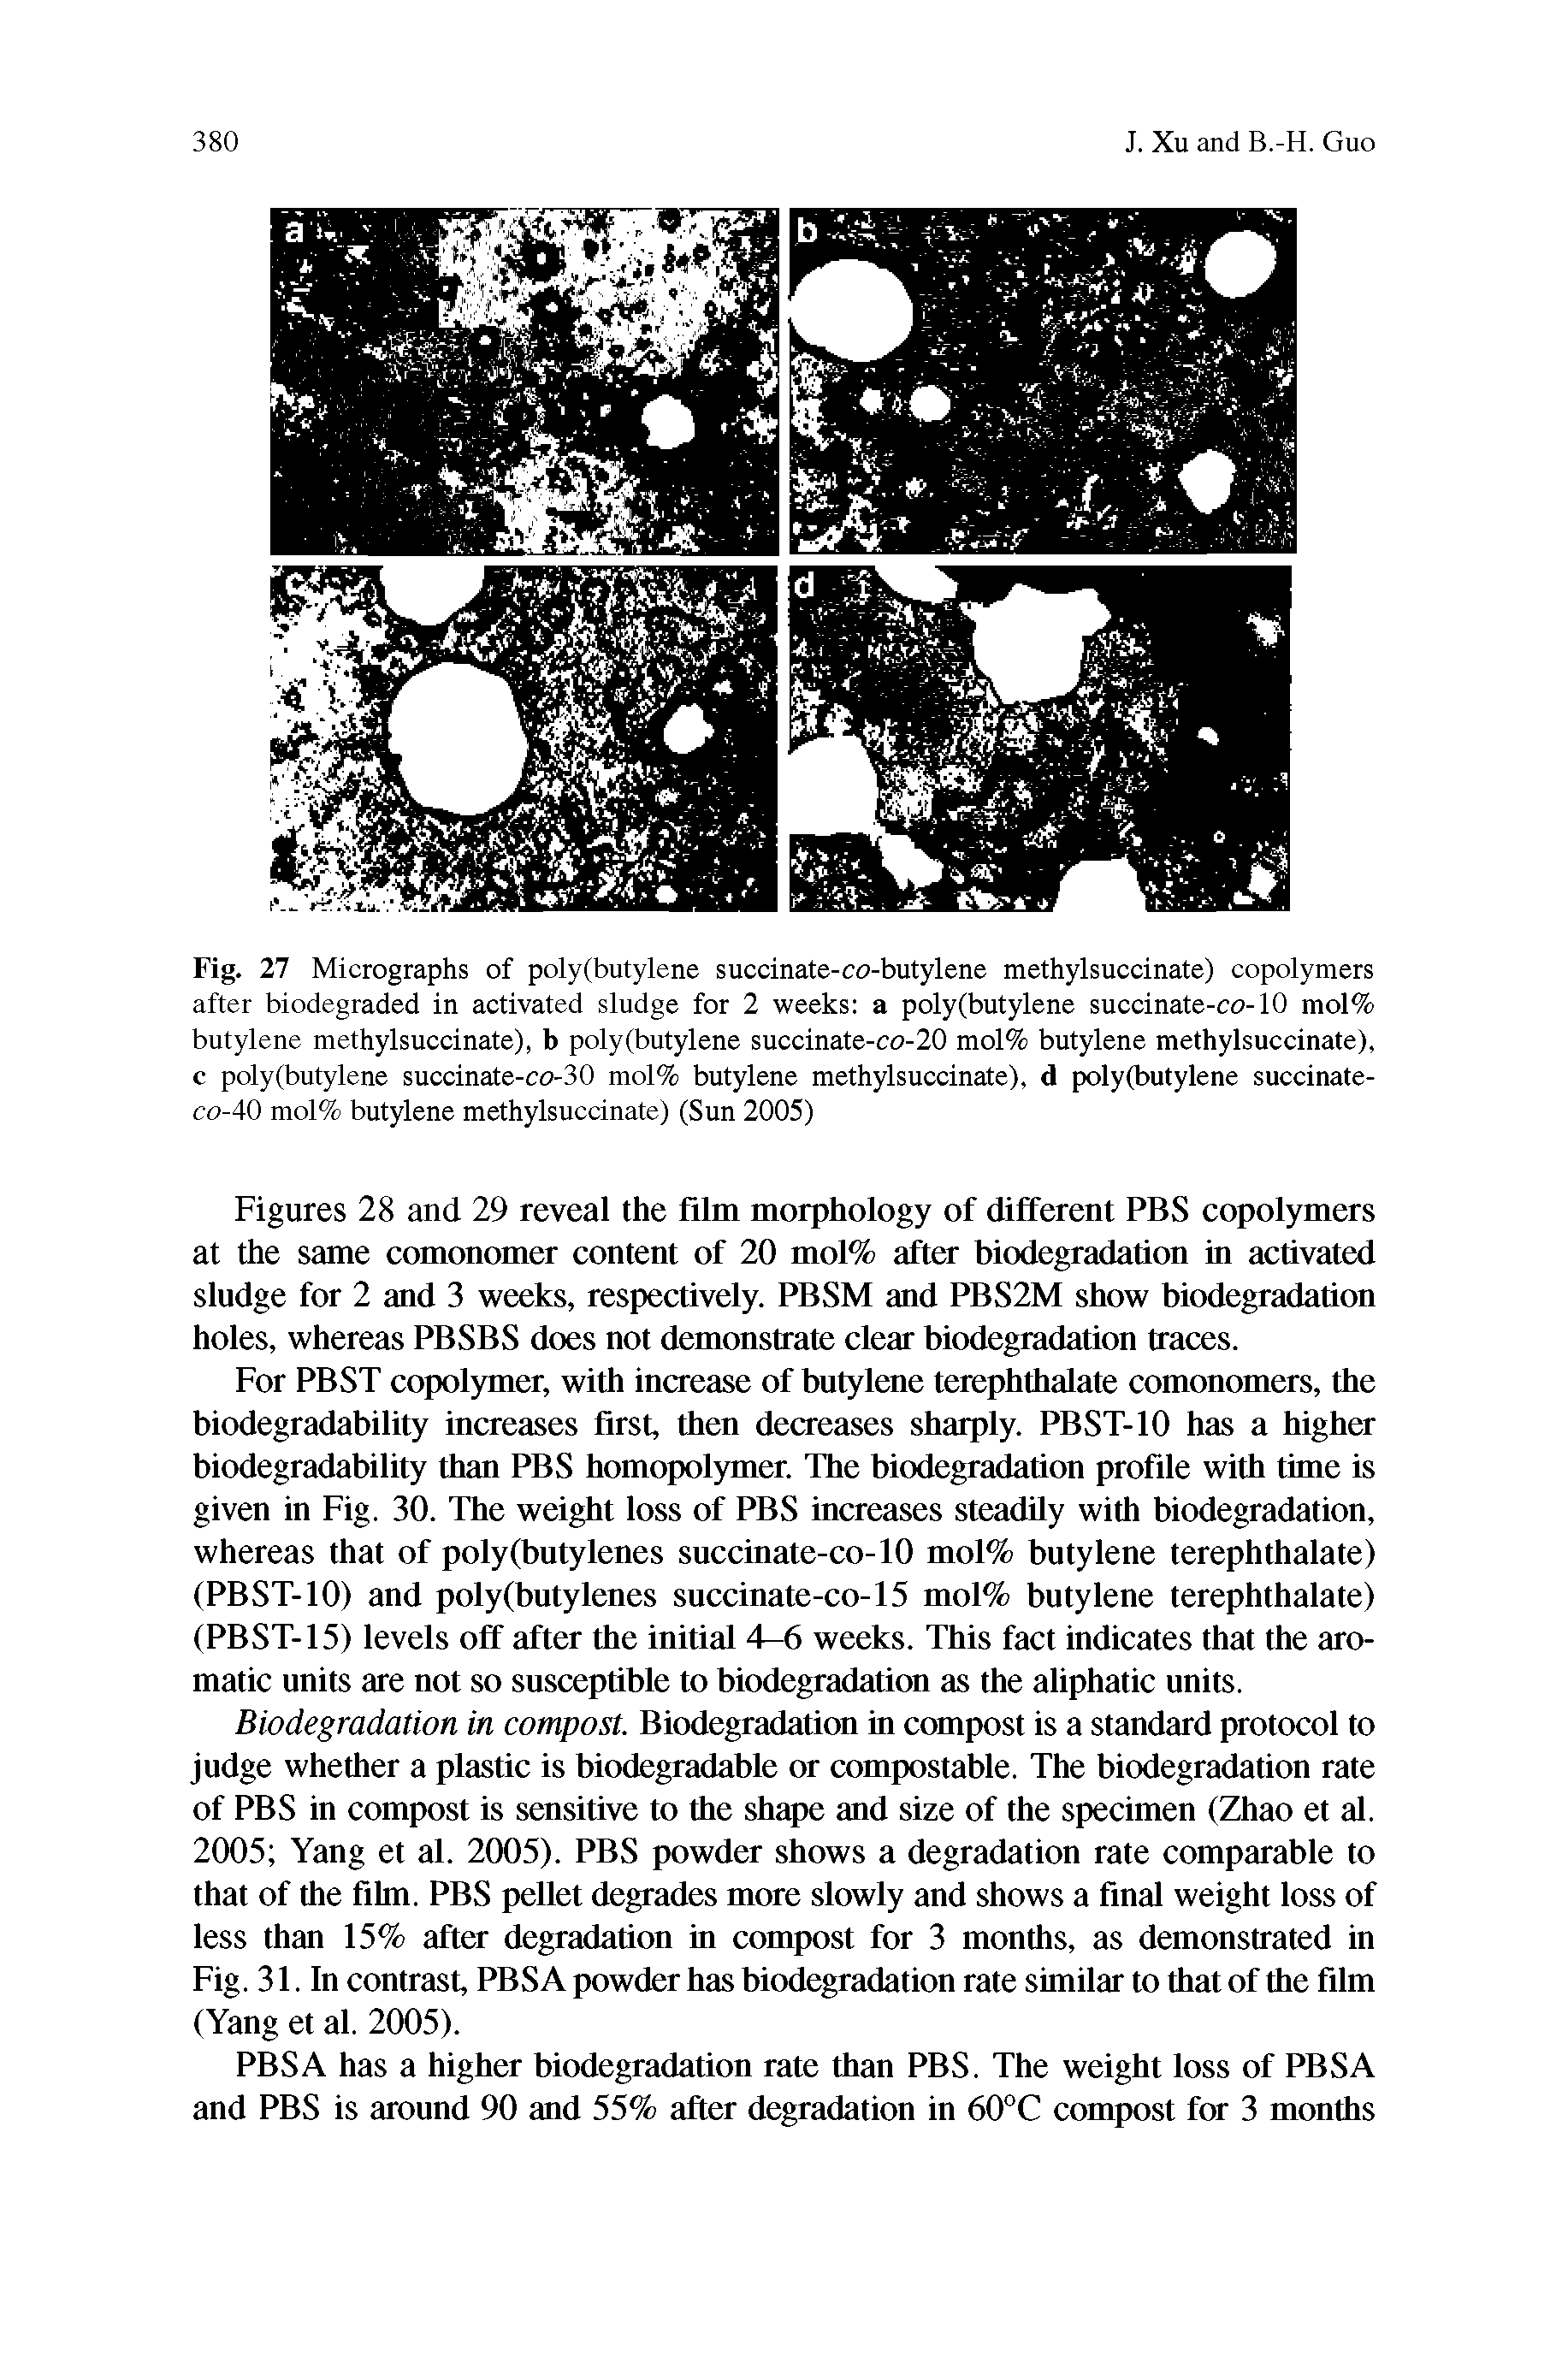 Fig. 27 Micrographs of poly(butylene succinate-co-butylene methylsuccinate) copolymers after biodegraded in activated sludge for 2 weeks a poly(butylene succinate-co-10 mol% butylene methylsuccinate), b poly(butylene succinate-co-20 mol% butylene methylsuccinate), c poly(butylene succinate-co-30 mol% butylene methylsuccinate), d poly(butylene succinate-co-40 mol% butylene methylsuccinate) (Sun 2005)...